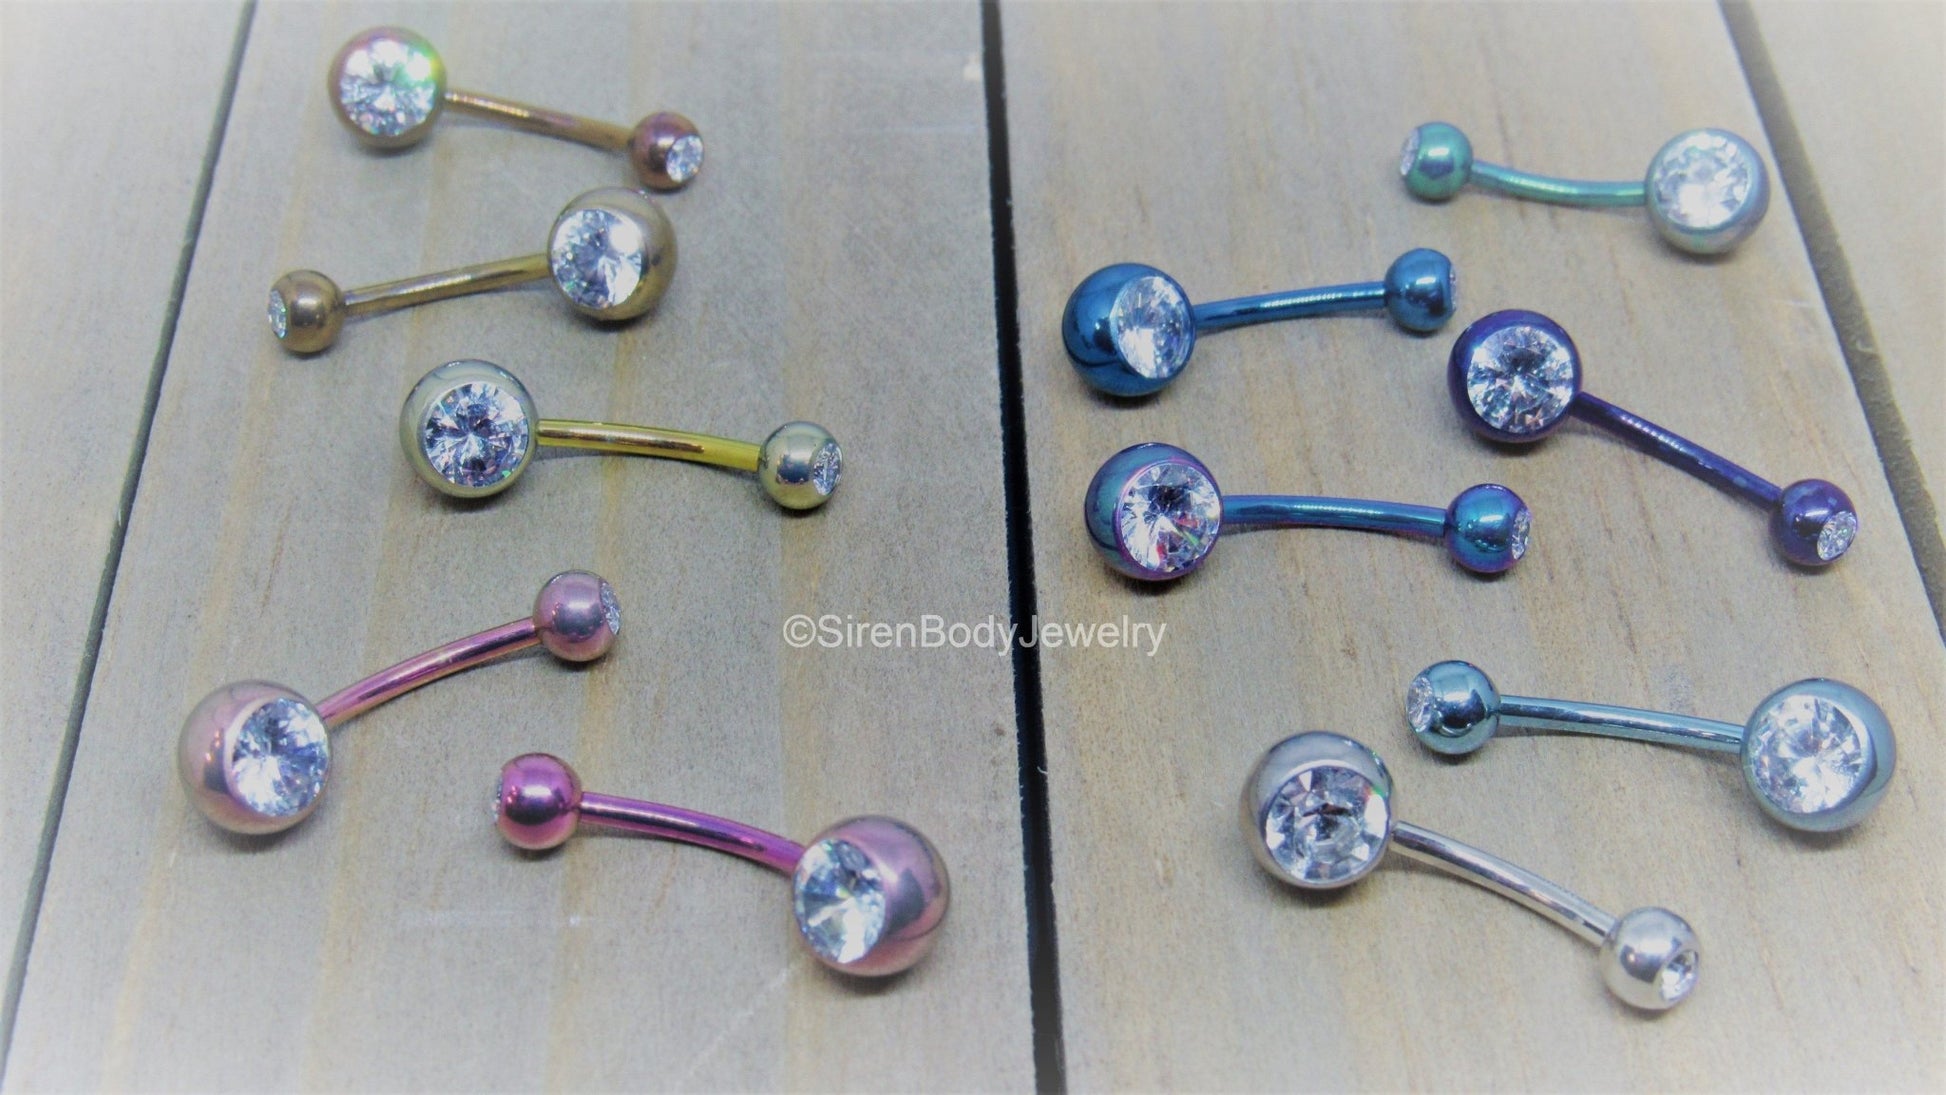 Titanium belly ring 14g navel curve 3/8"-1/2" anodized pick your color double clear gem VCH bar - SirenBodyJewelry